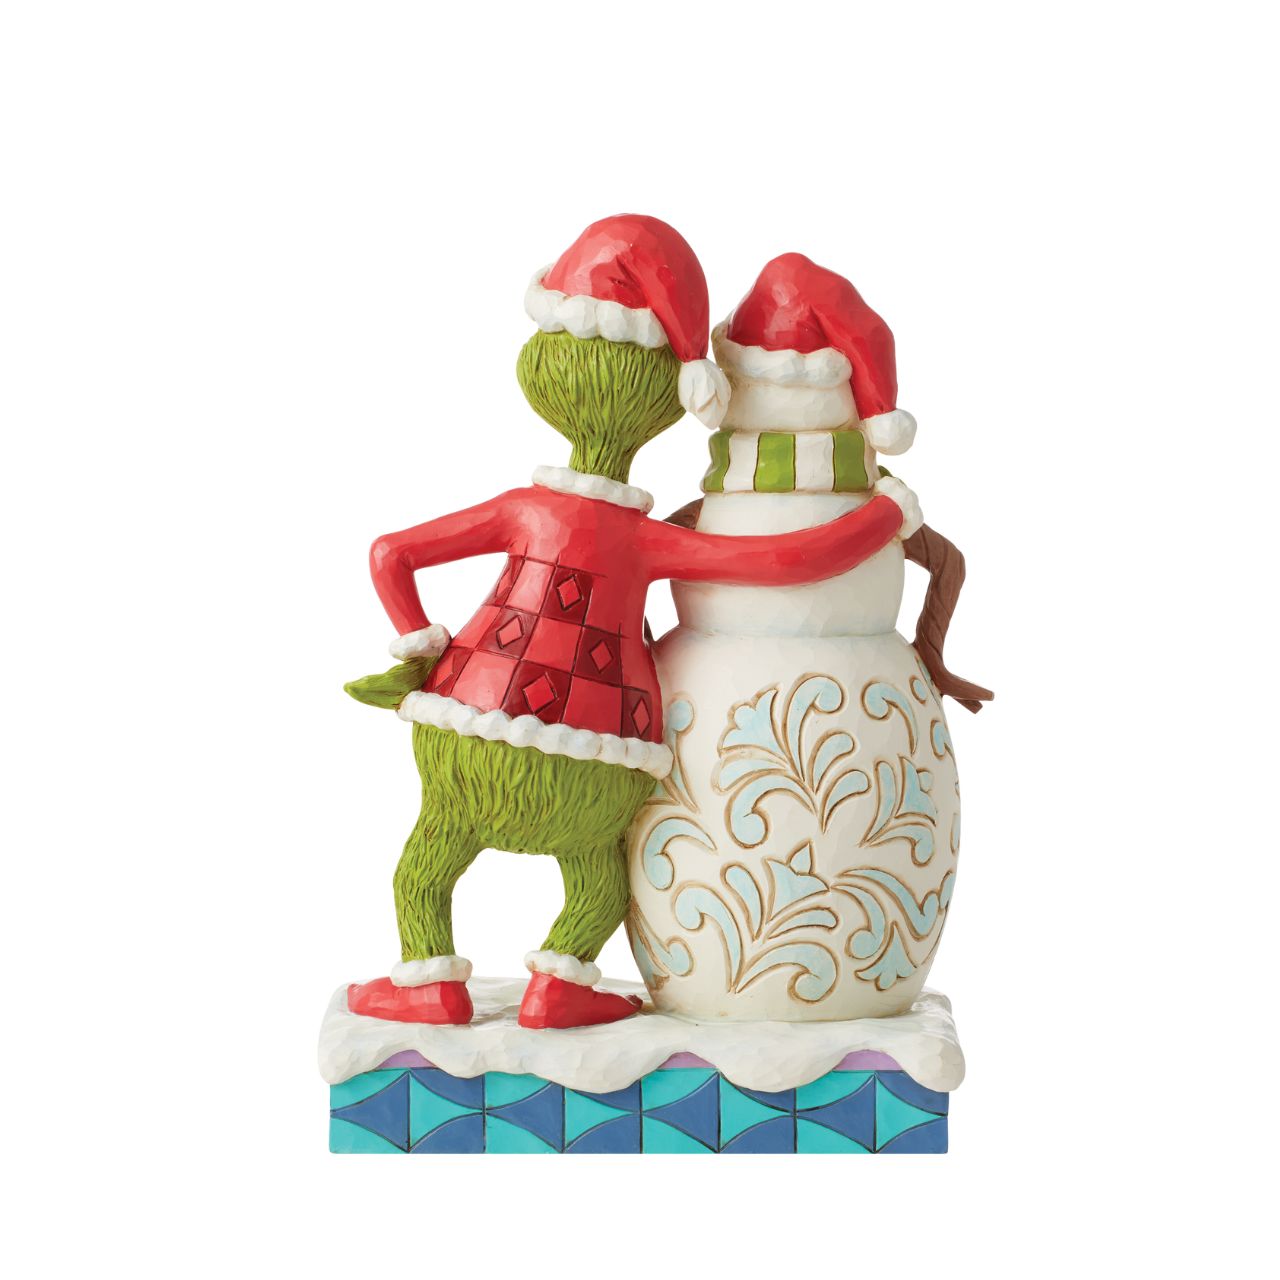 The Grinch with Grinchy Snowman  Designed by award-winning artist and sculptor Jim Shore for The Grinch. Item is supplied in branded gift packaging. Unique variations should be expected as product is hand painted.